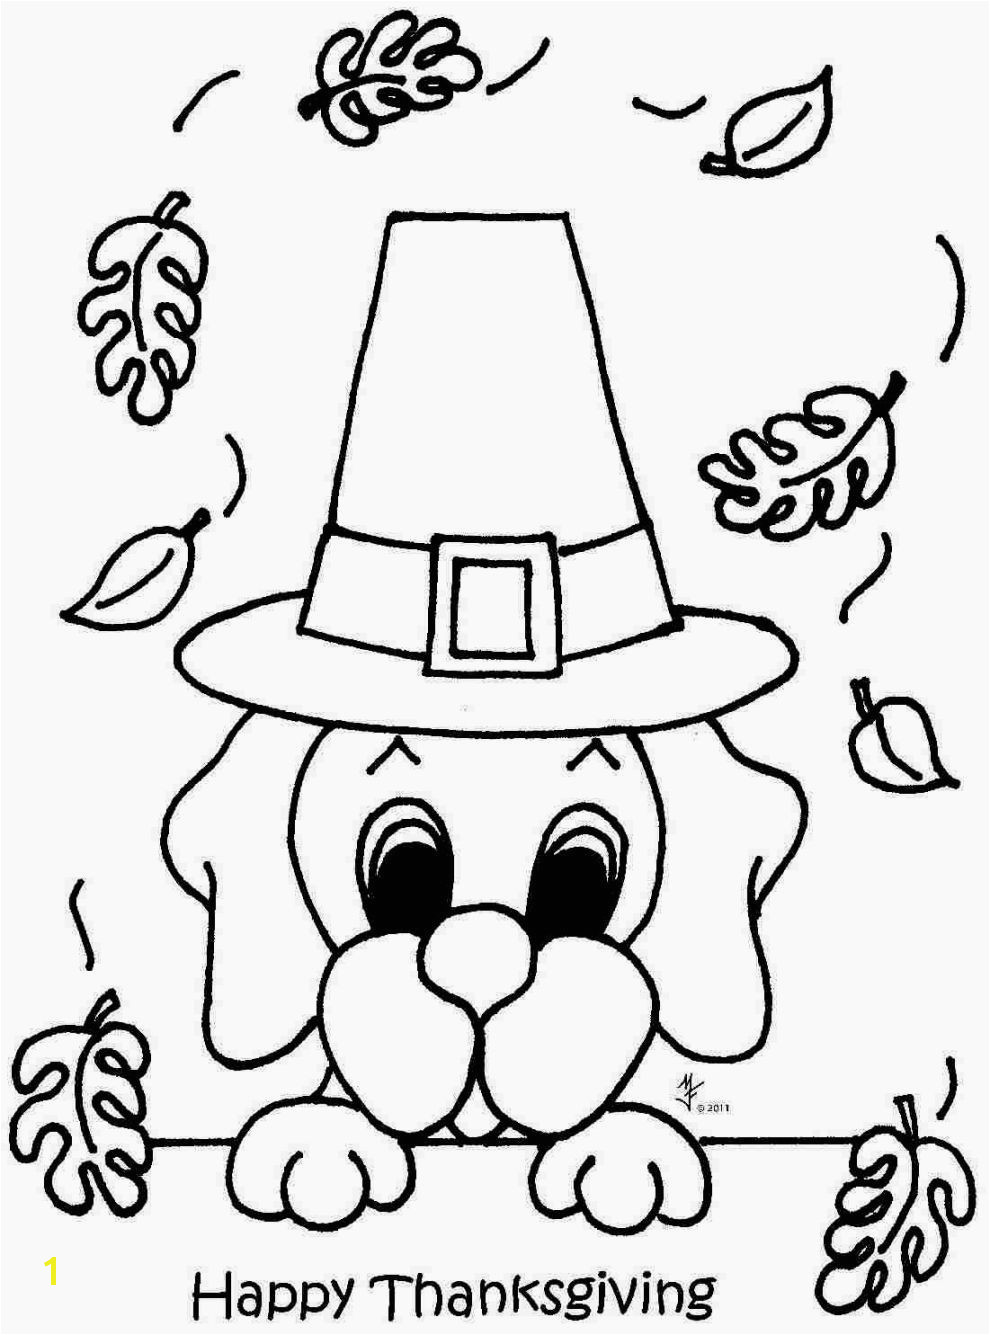 Preschool Thanksgiving Coloring Pages Coloring Pages Thanksgiving Coloring Pages